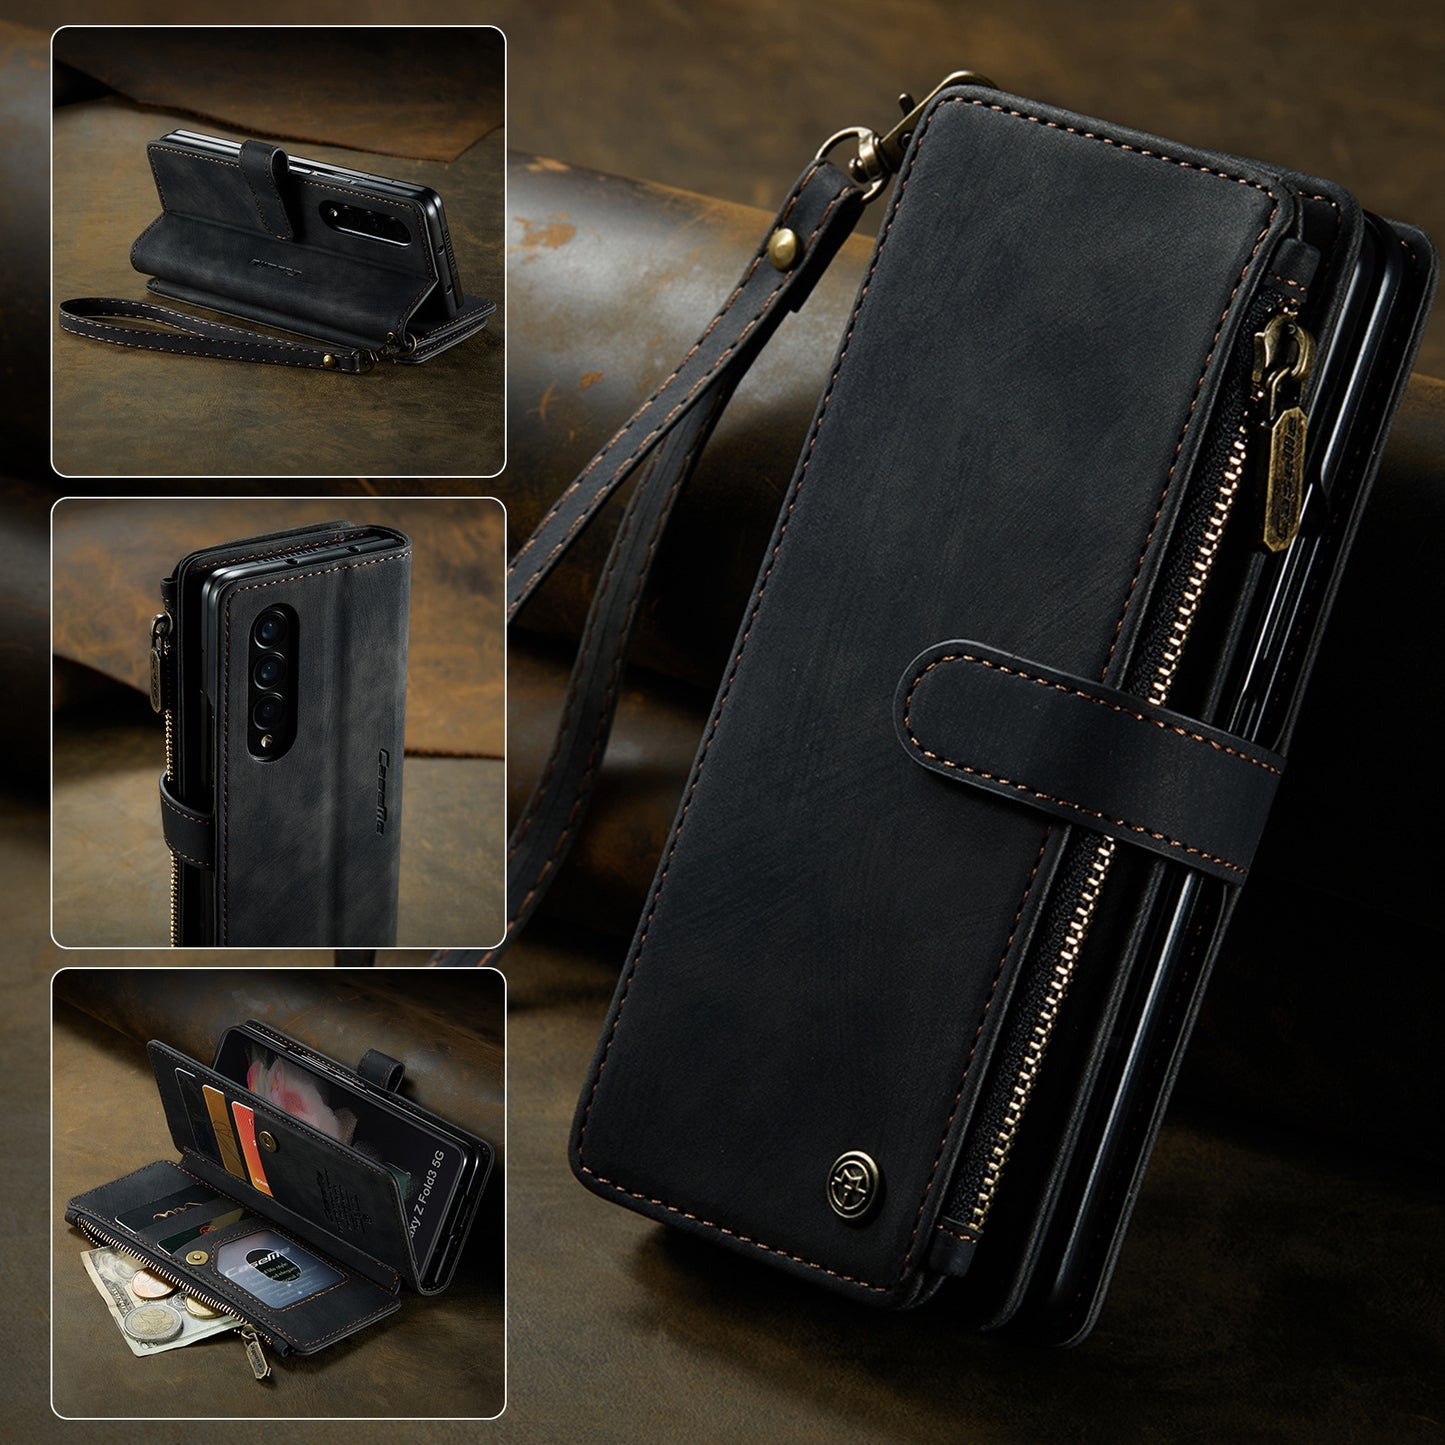 Luxurious Leather Protective Wallet Case for SAMSUNG Z FOLD 3/4/5